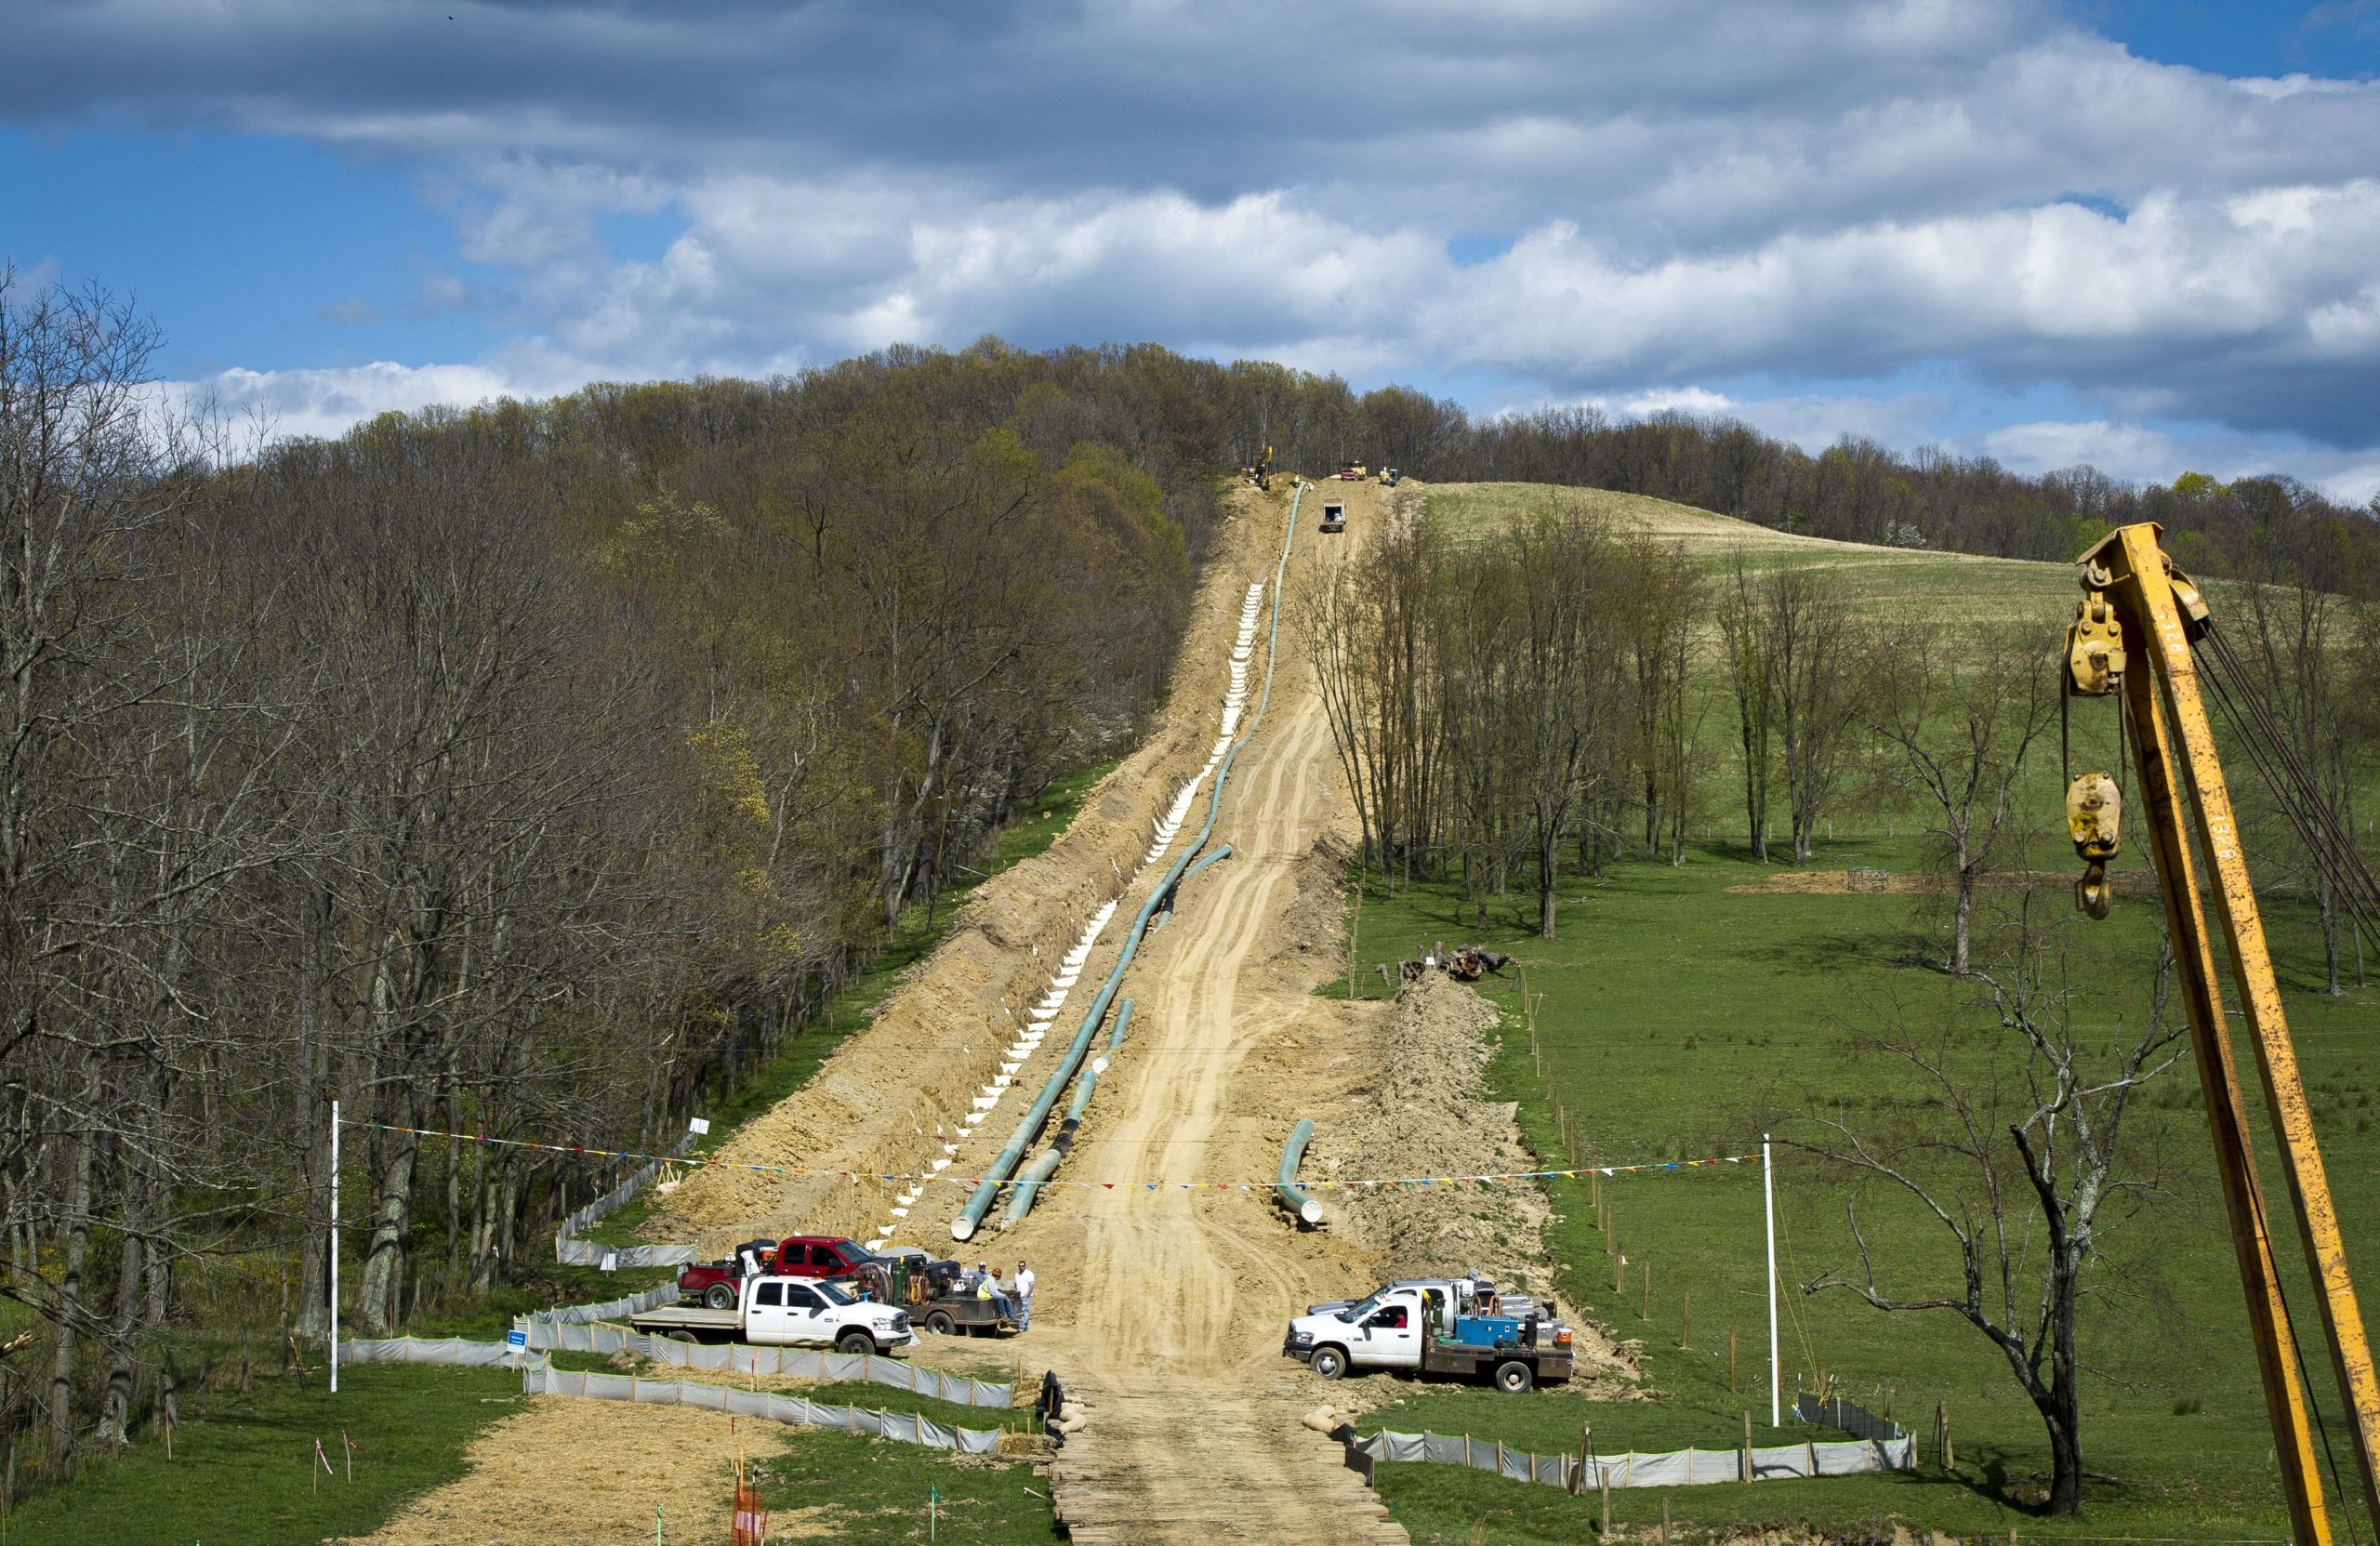 Workers construct a gas pipeline outside the town of Waynesburg, Pennsylvania on April 13, 2012. (Mladen Antonov/AFP via Getty Images)